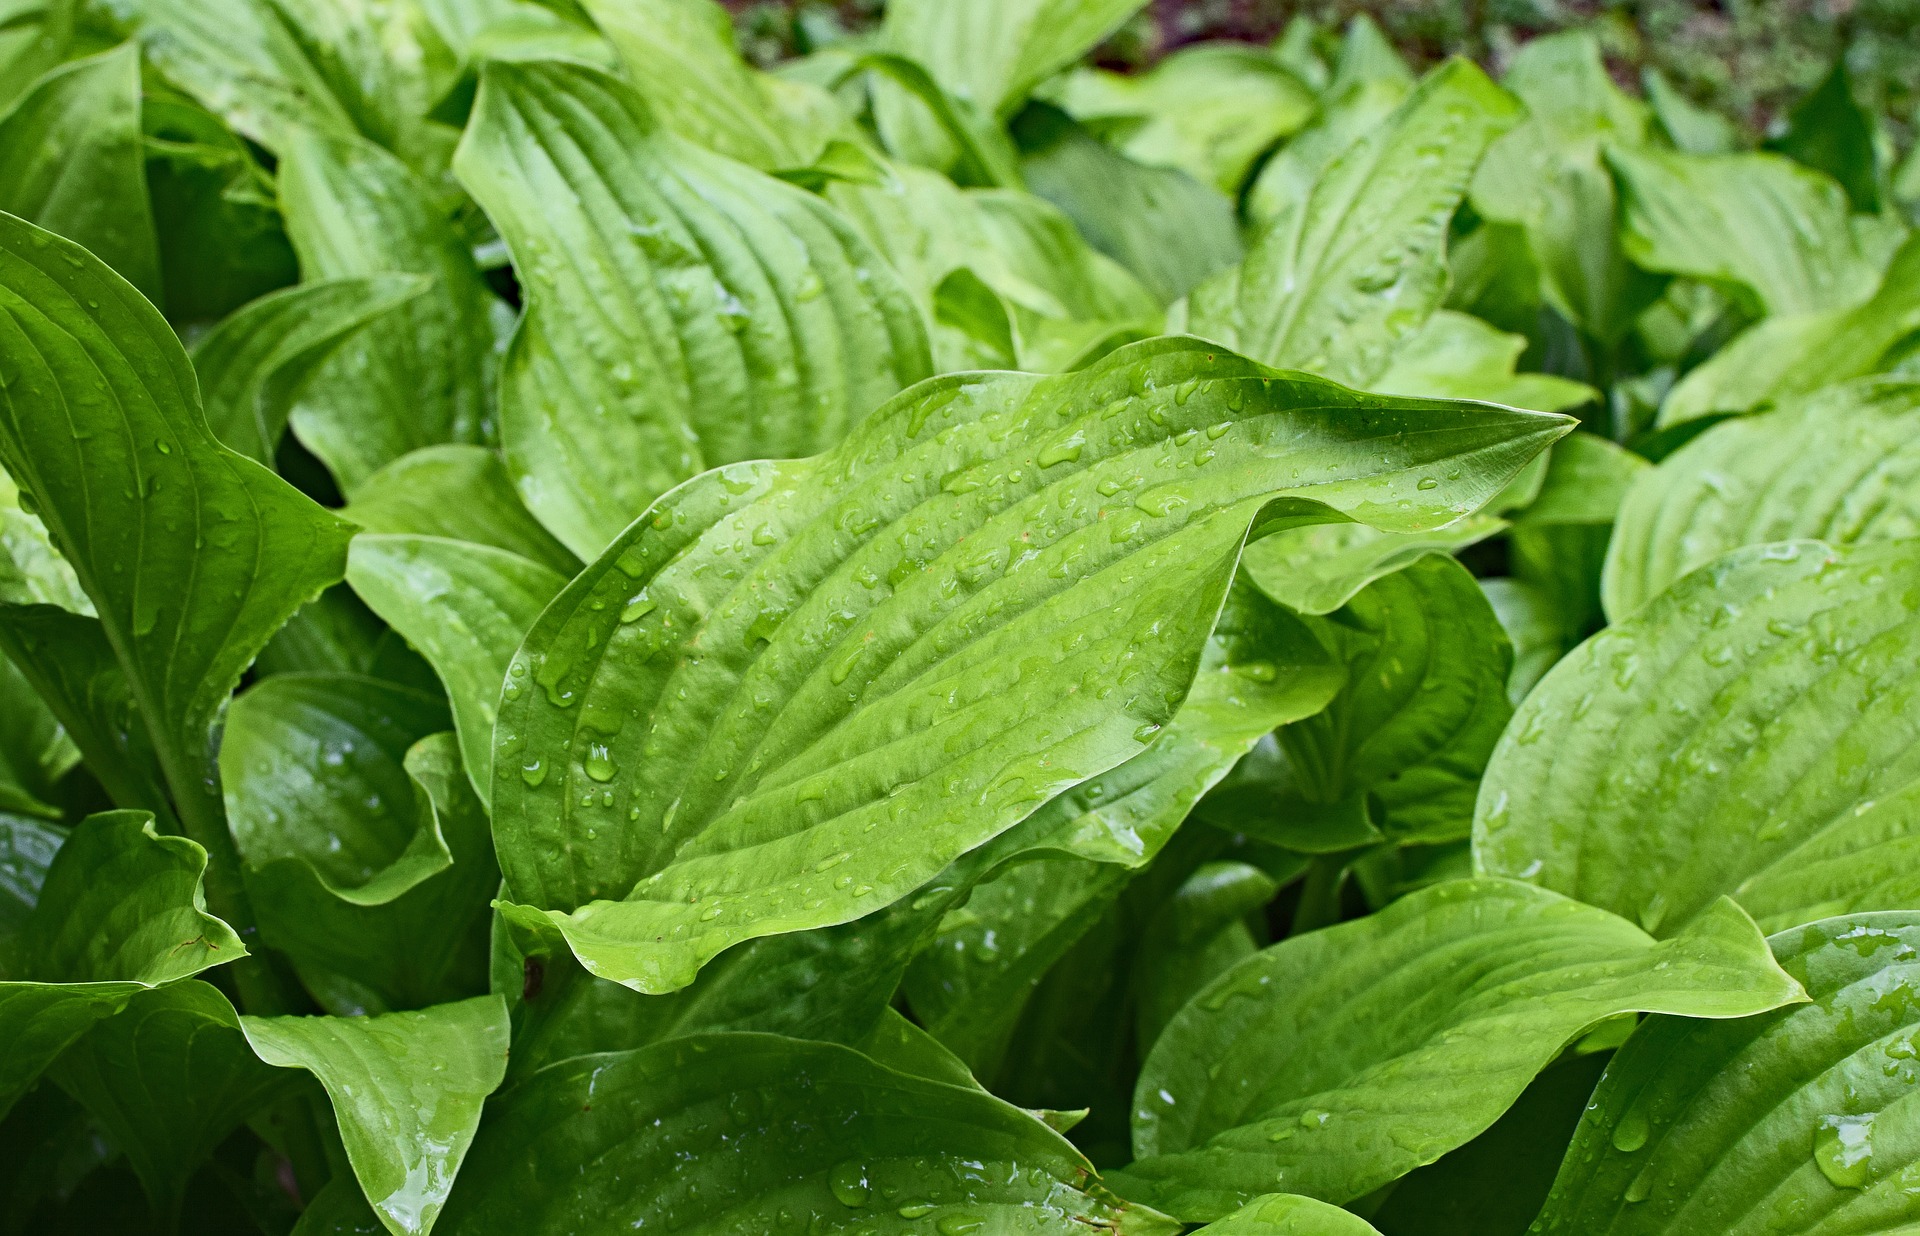 Rain Wet Plantain Lily Leaves 2438603 1920